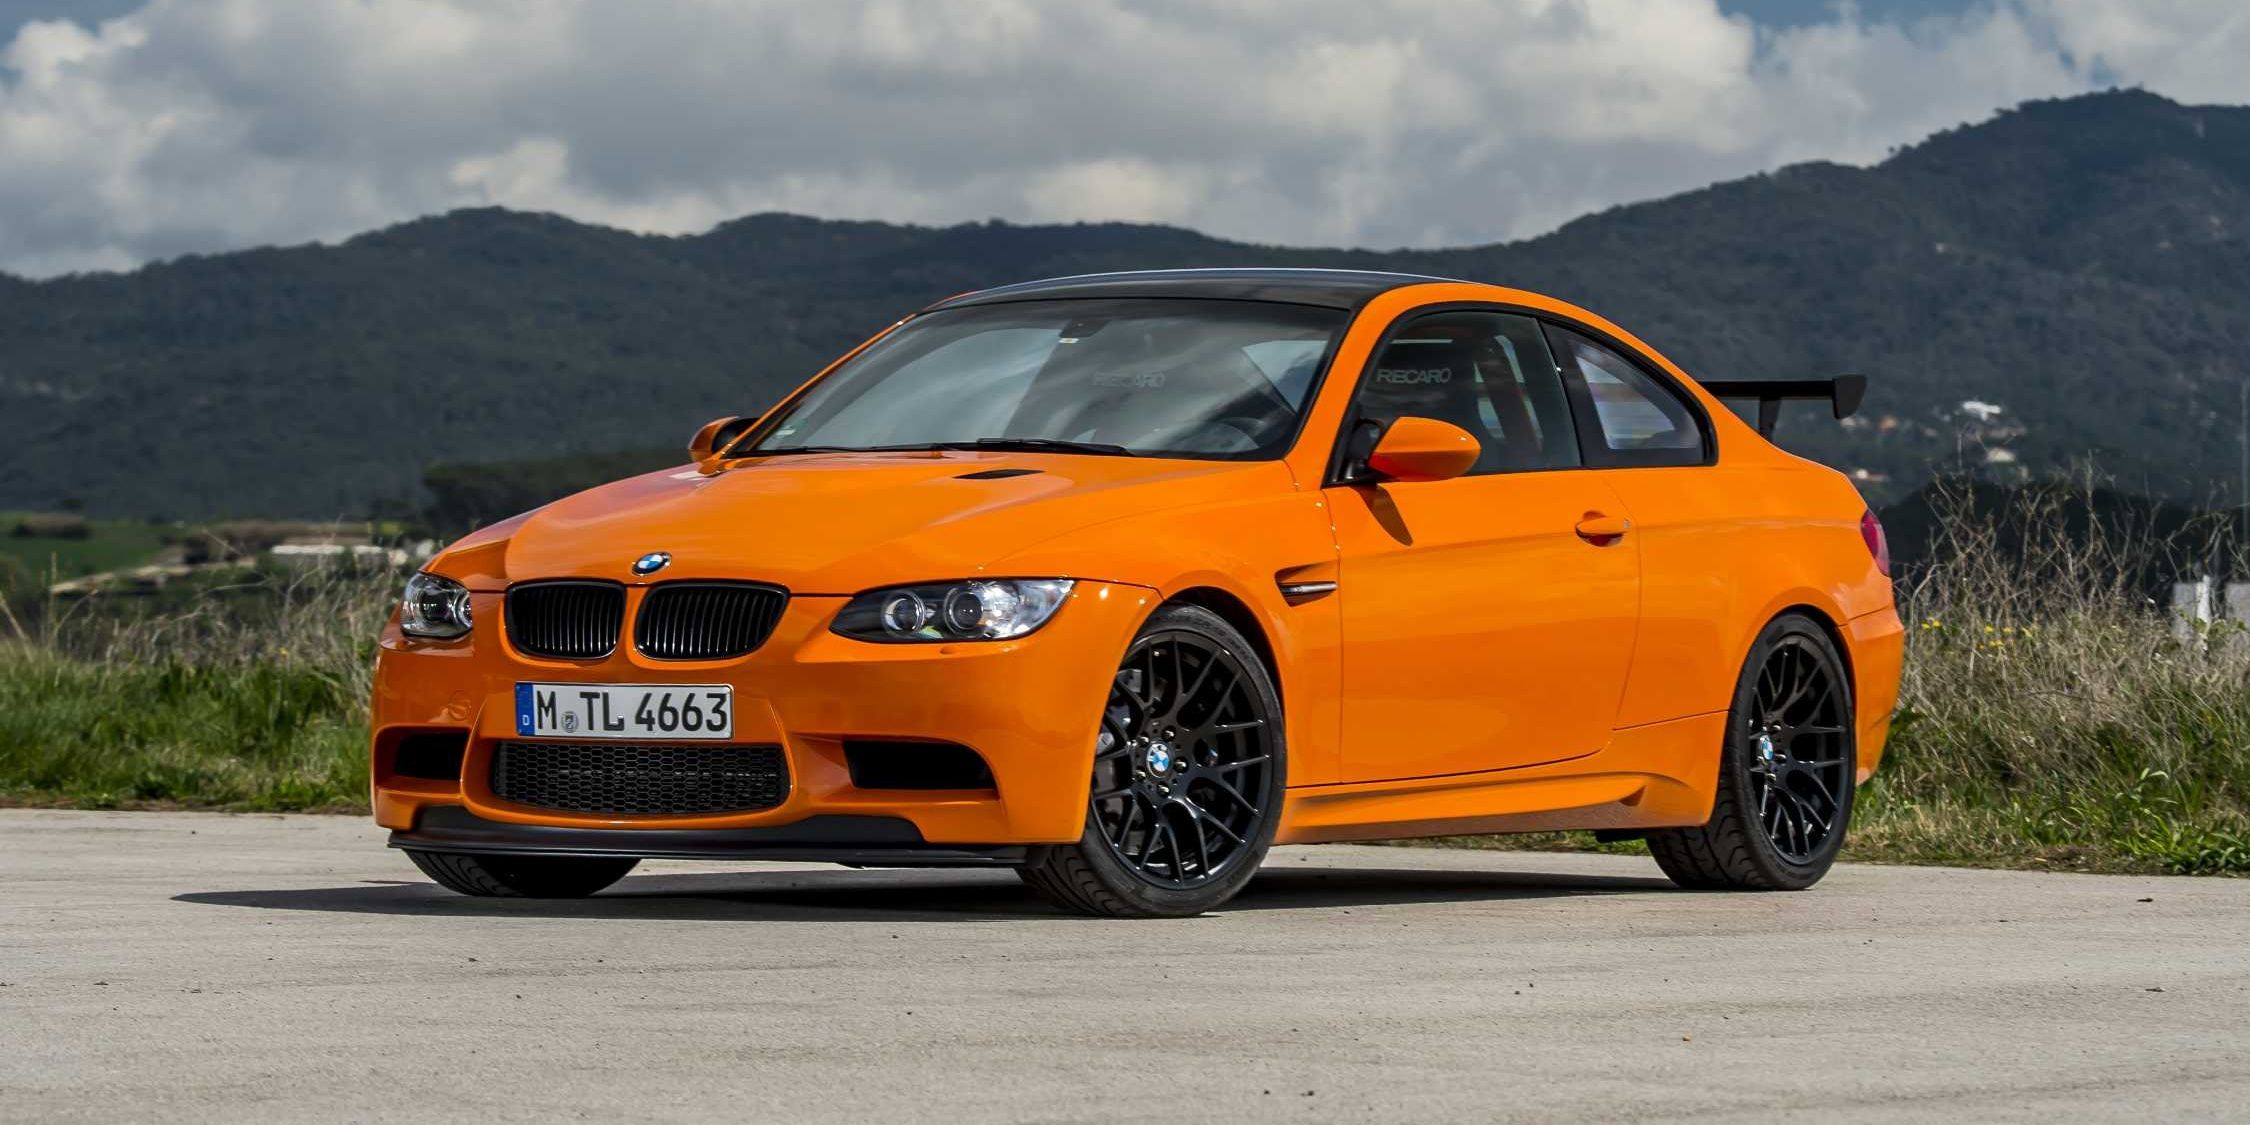 10 Things You Need To Know Before Buying A Used BMW E92 M3